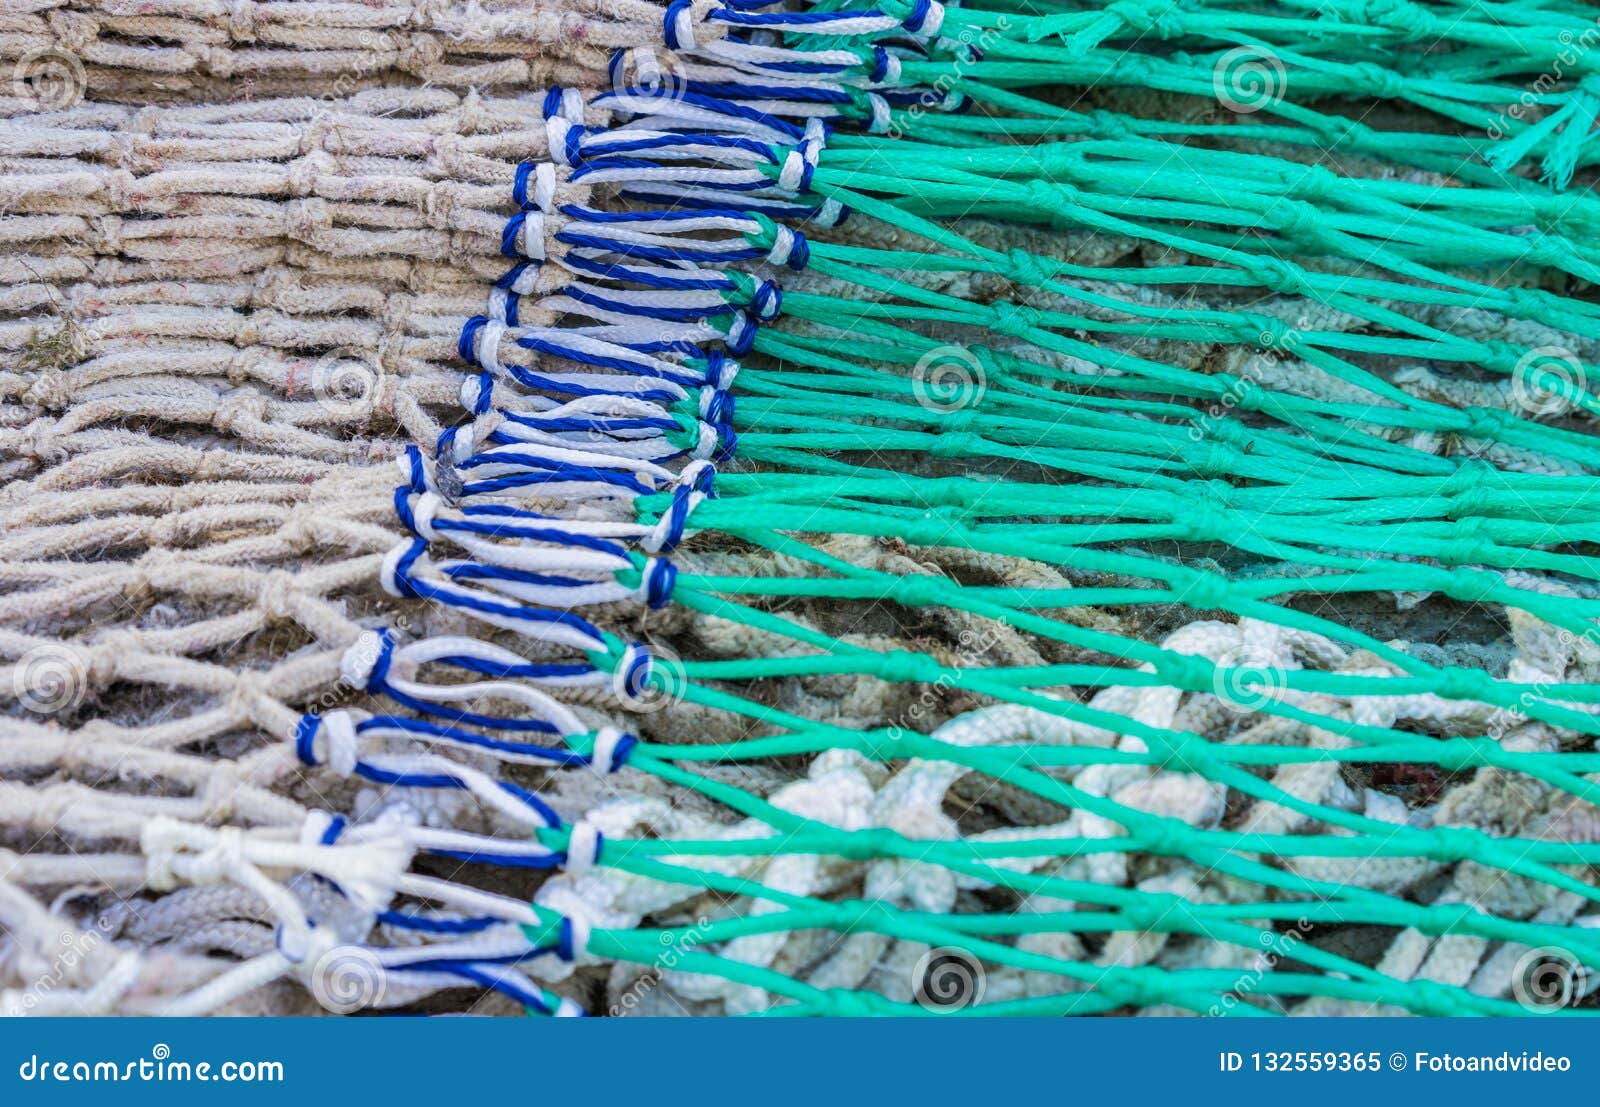 Knotted Pattern of Fishing Net Mesh Stock Image - Image of knotted